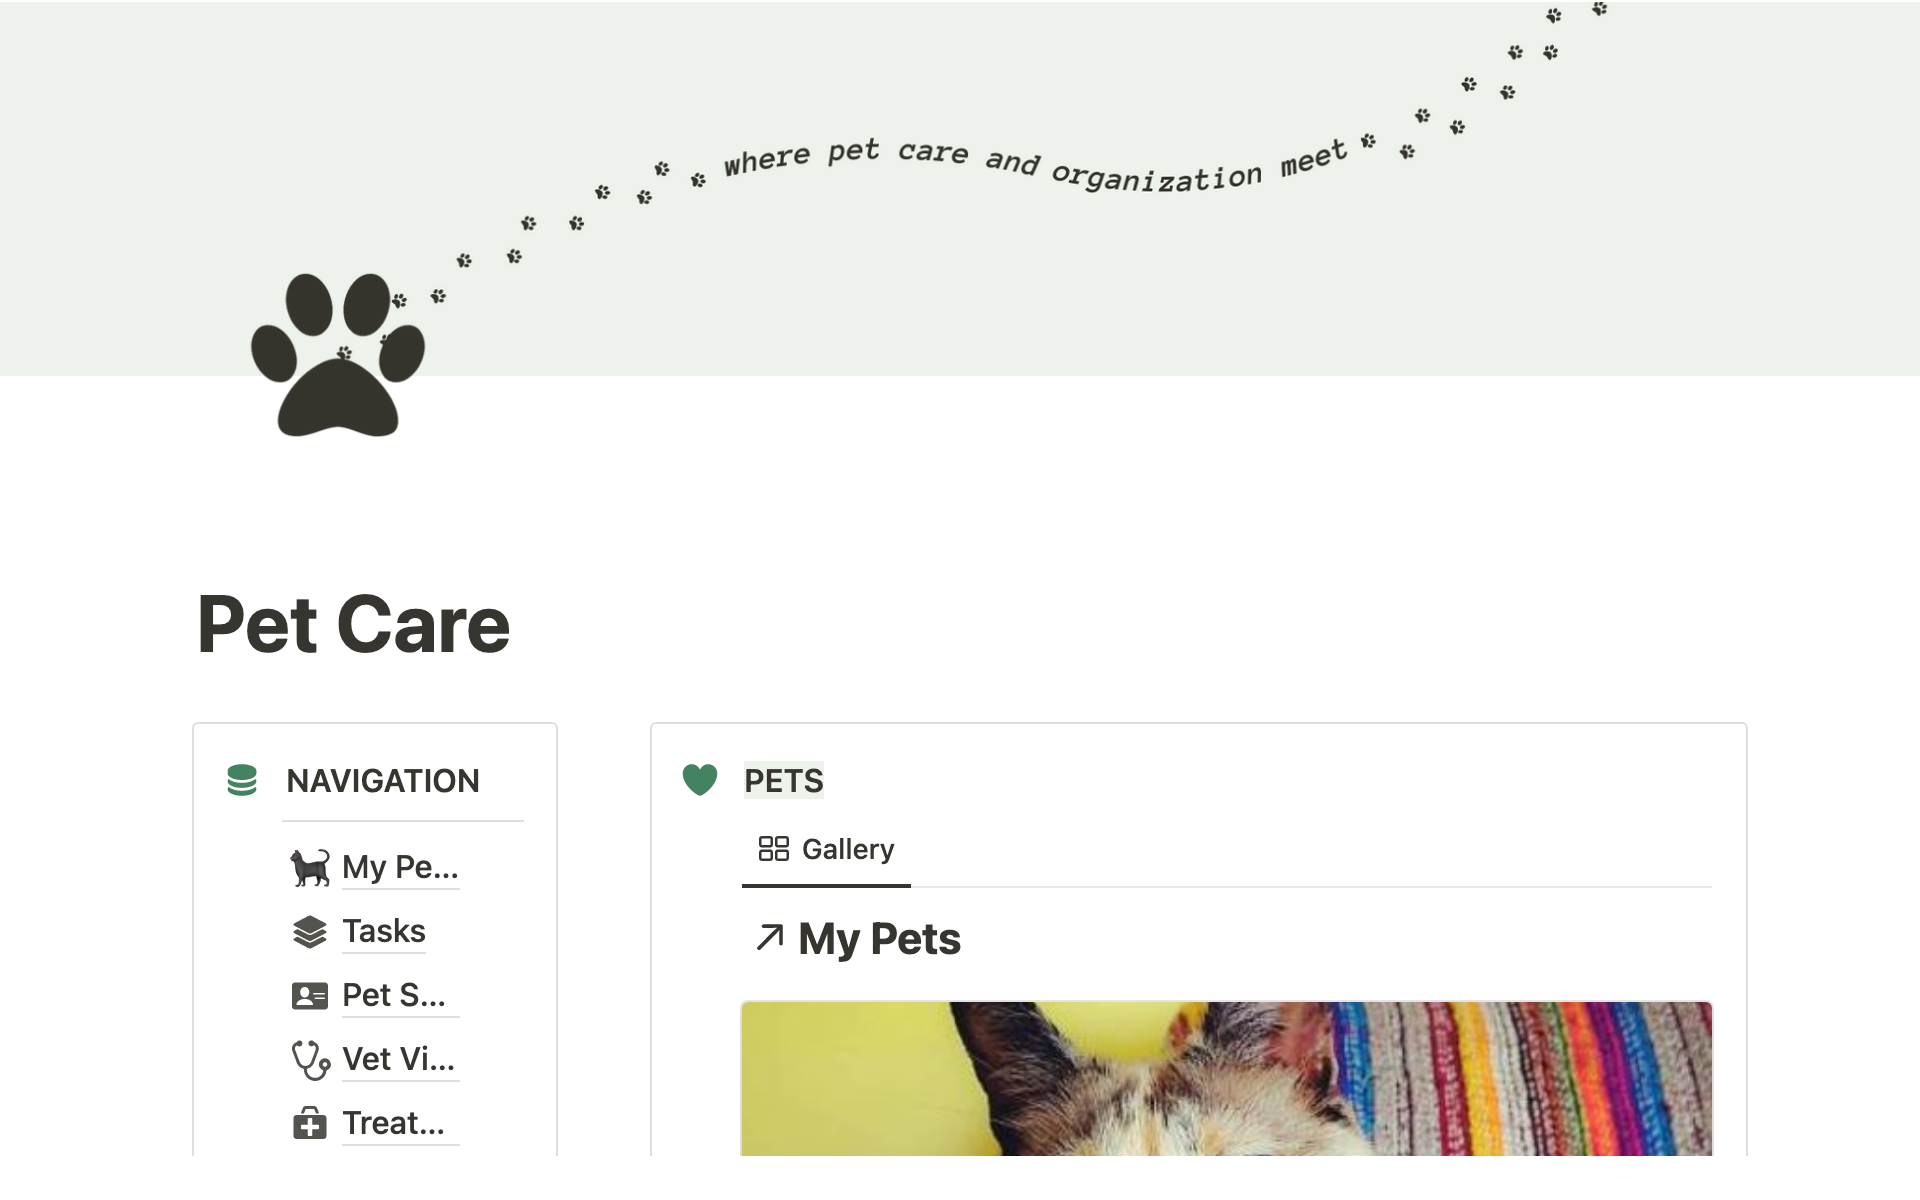 This Notion template allows you to easily manage all of your pet's important information in one place.